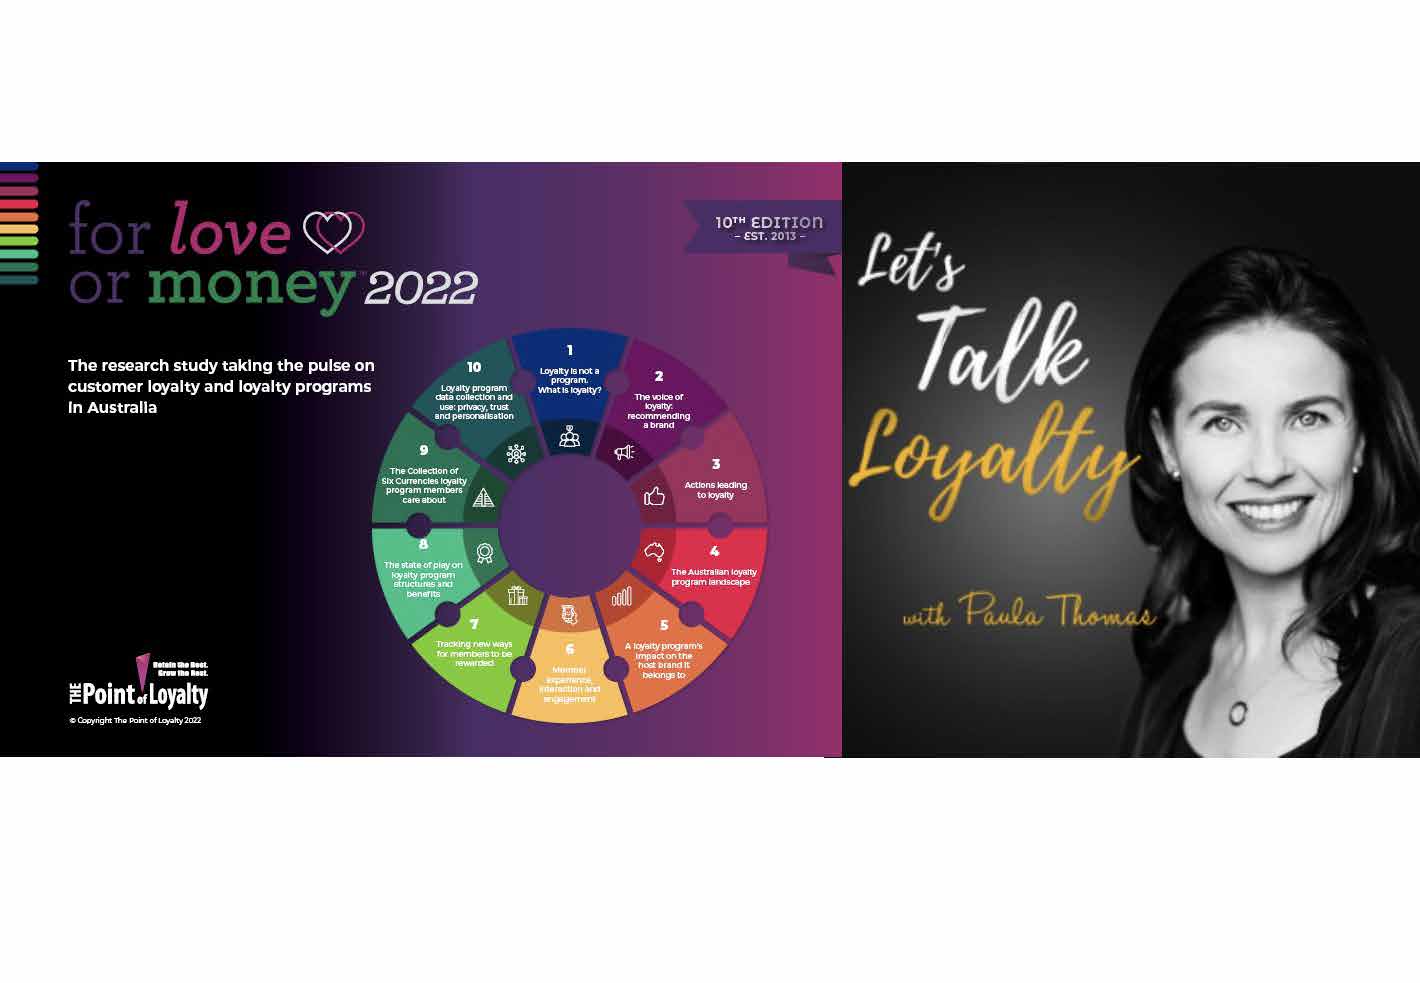 Let's Talk Loyalty and For Love or Money